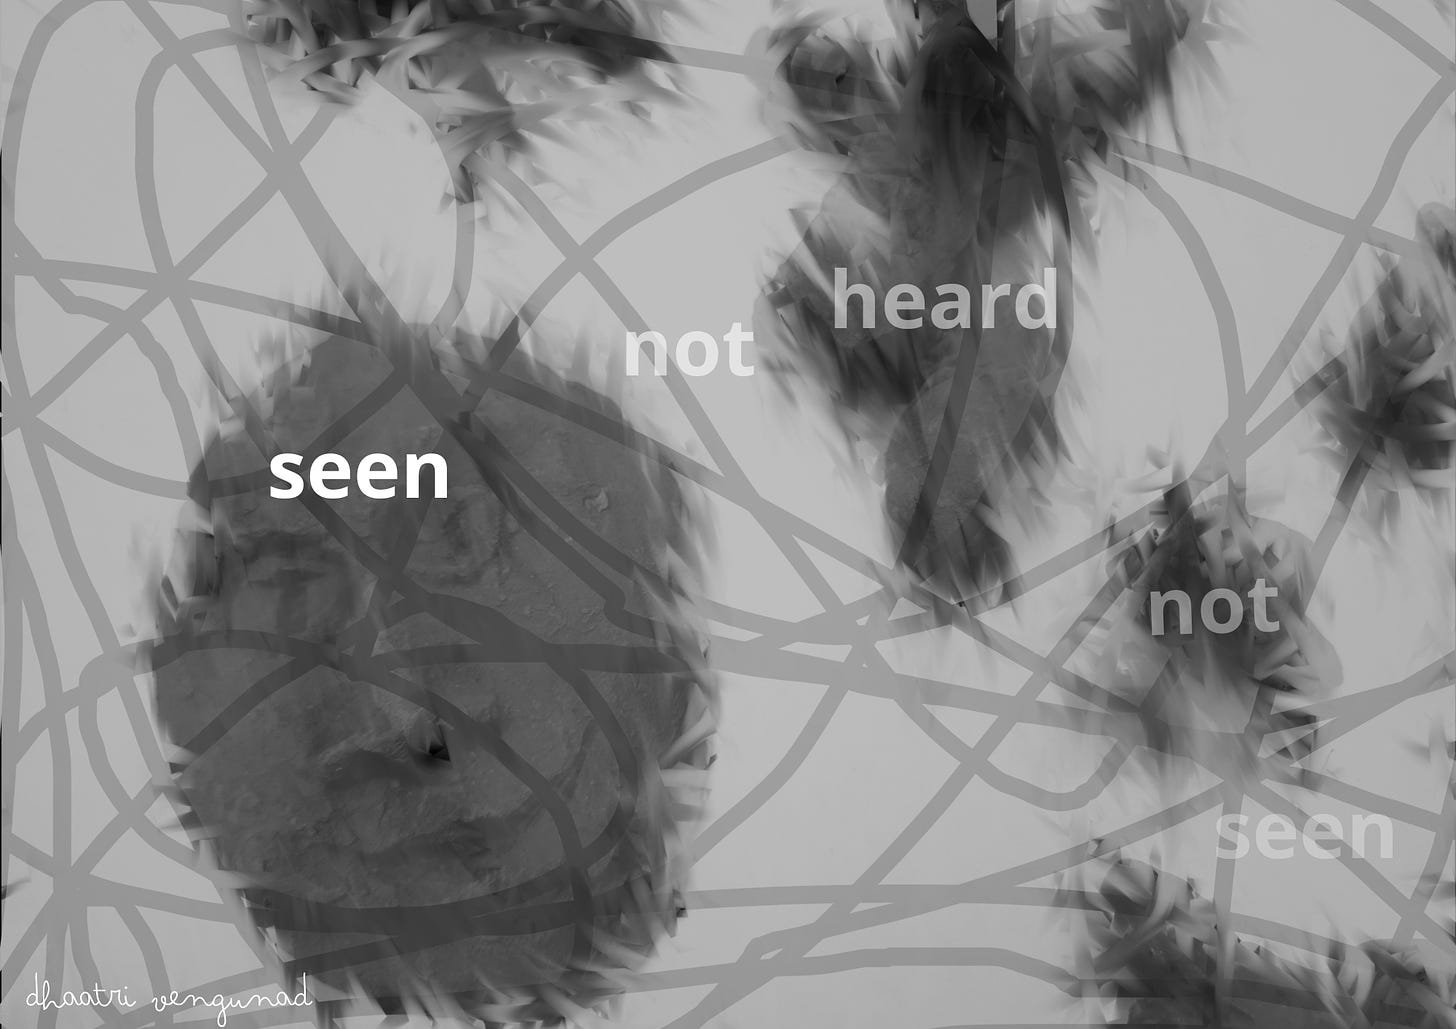 A black and white glitched image of various minature clay models lying scattered on the floor, including one that looks like a face. The words that go with the visual are: seen not heard not seen. These words are placed fading progressively.